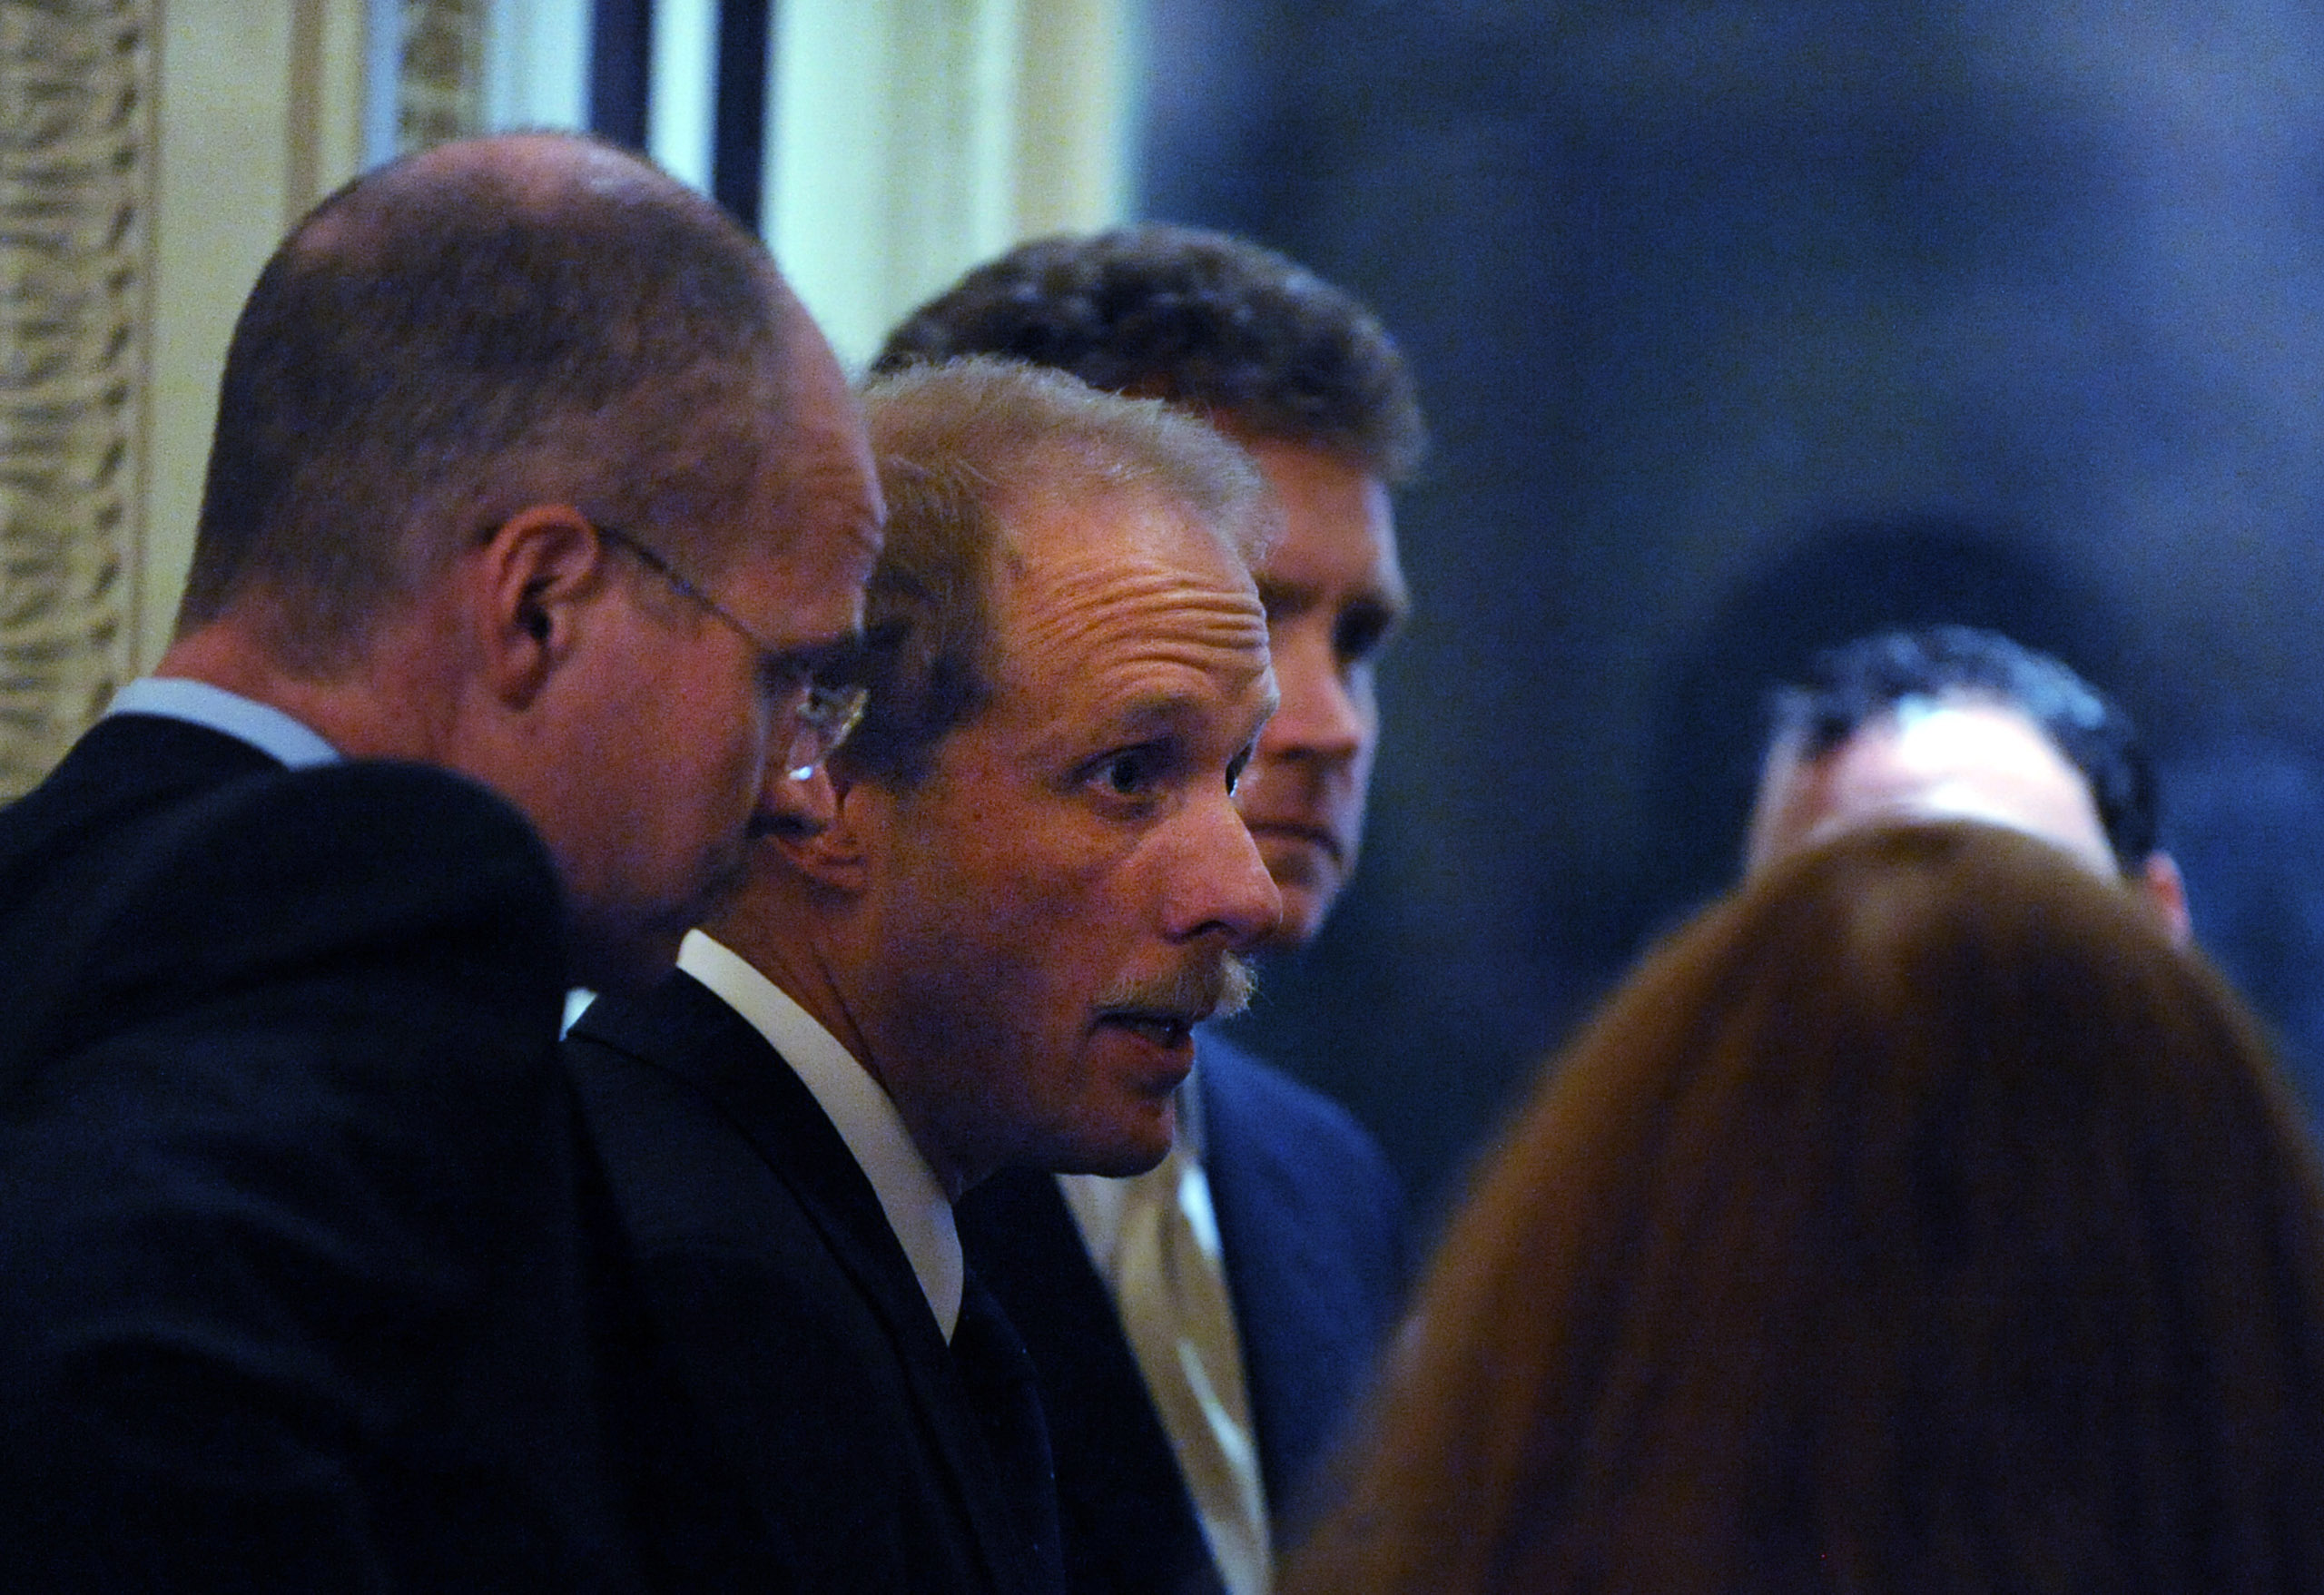 Stephen Feinberg (second from left), a participant in the auto bailout deal, convenes with his crew as lawmakers discuss the auto bailout bill at the US Capitol in Washington in 2008. ((The Washington Post—Washington Post/Getty Images))